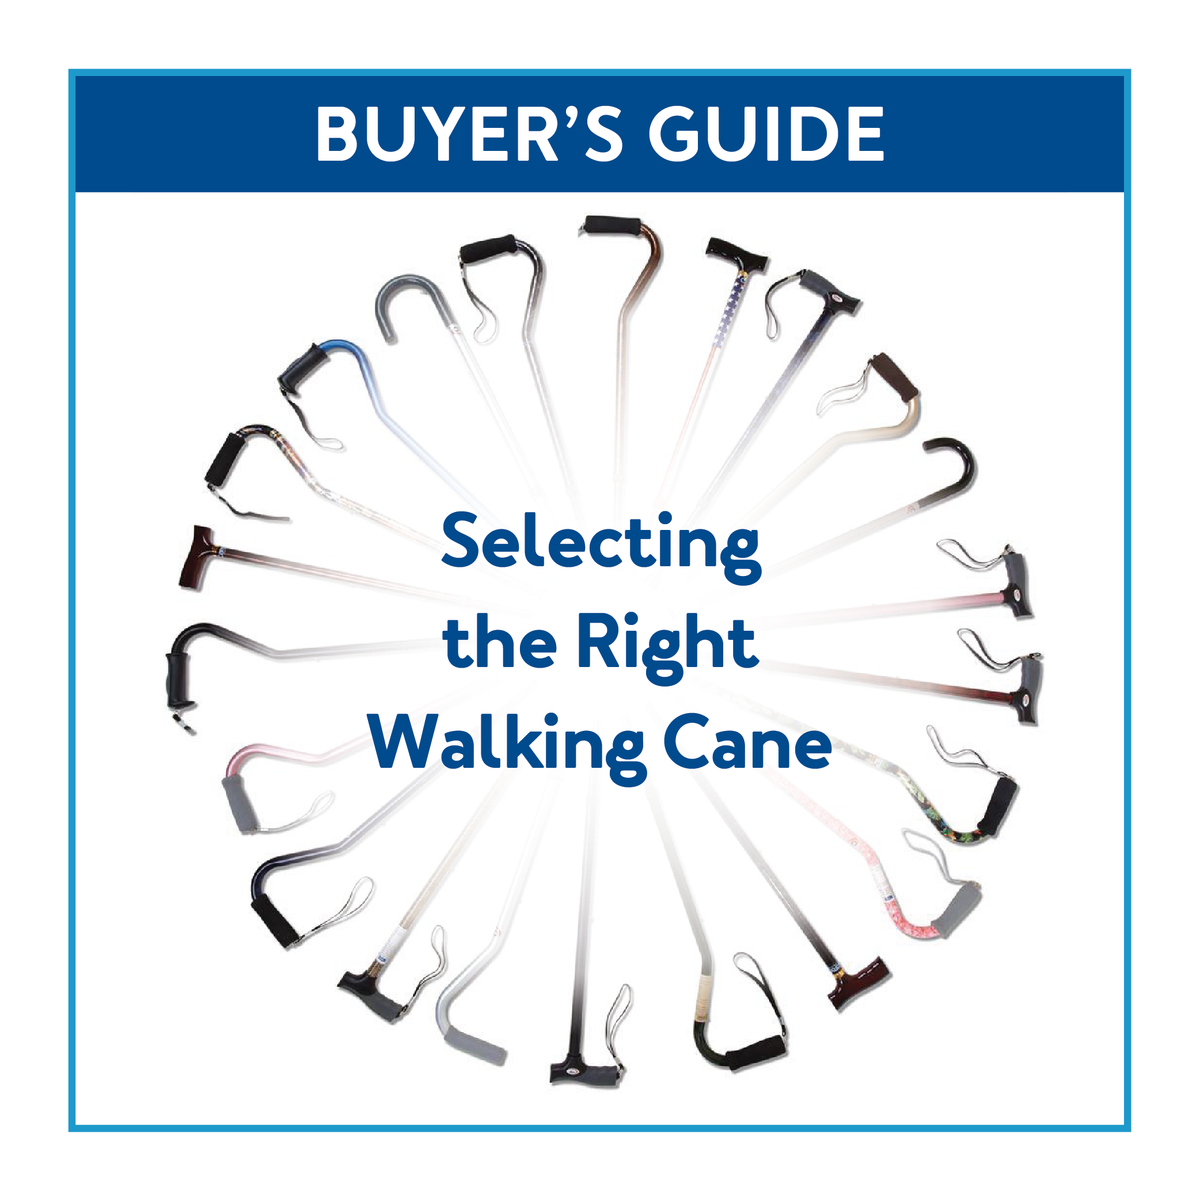 Walking canes in a circular formation within a blue border with text Buyer’s Guide: Selecting the Right Walking 